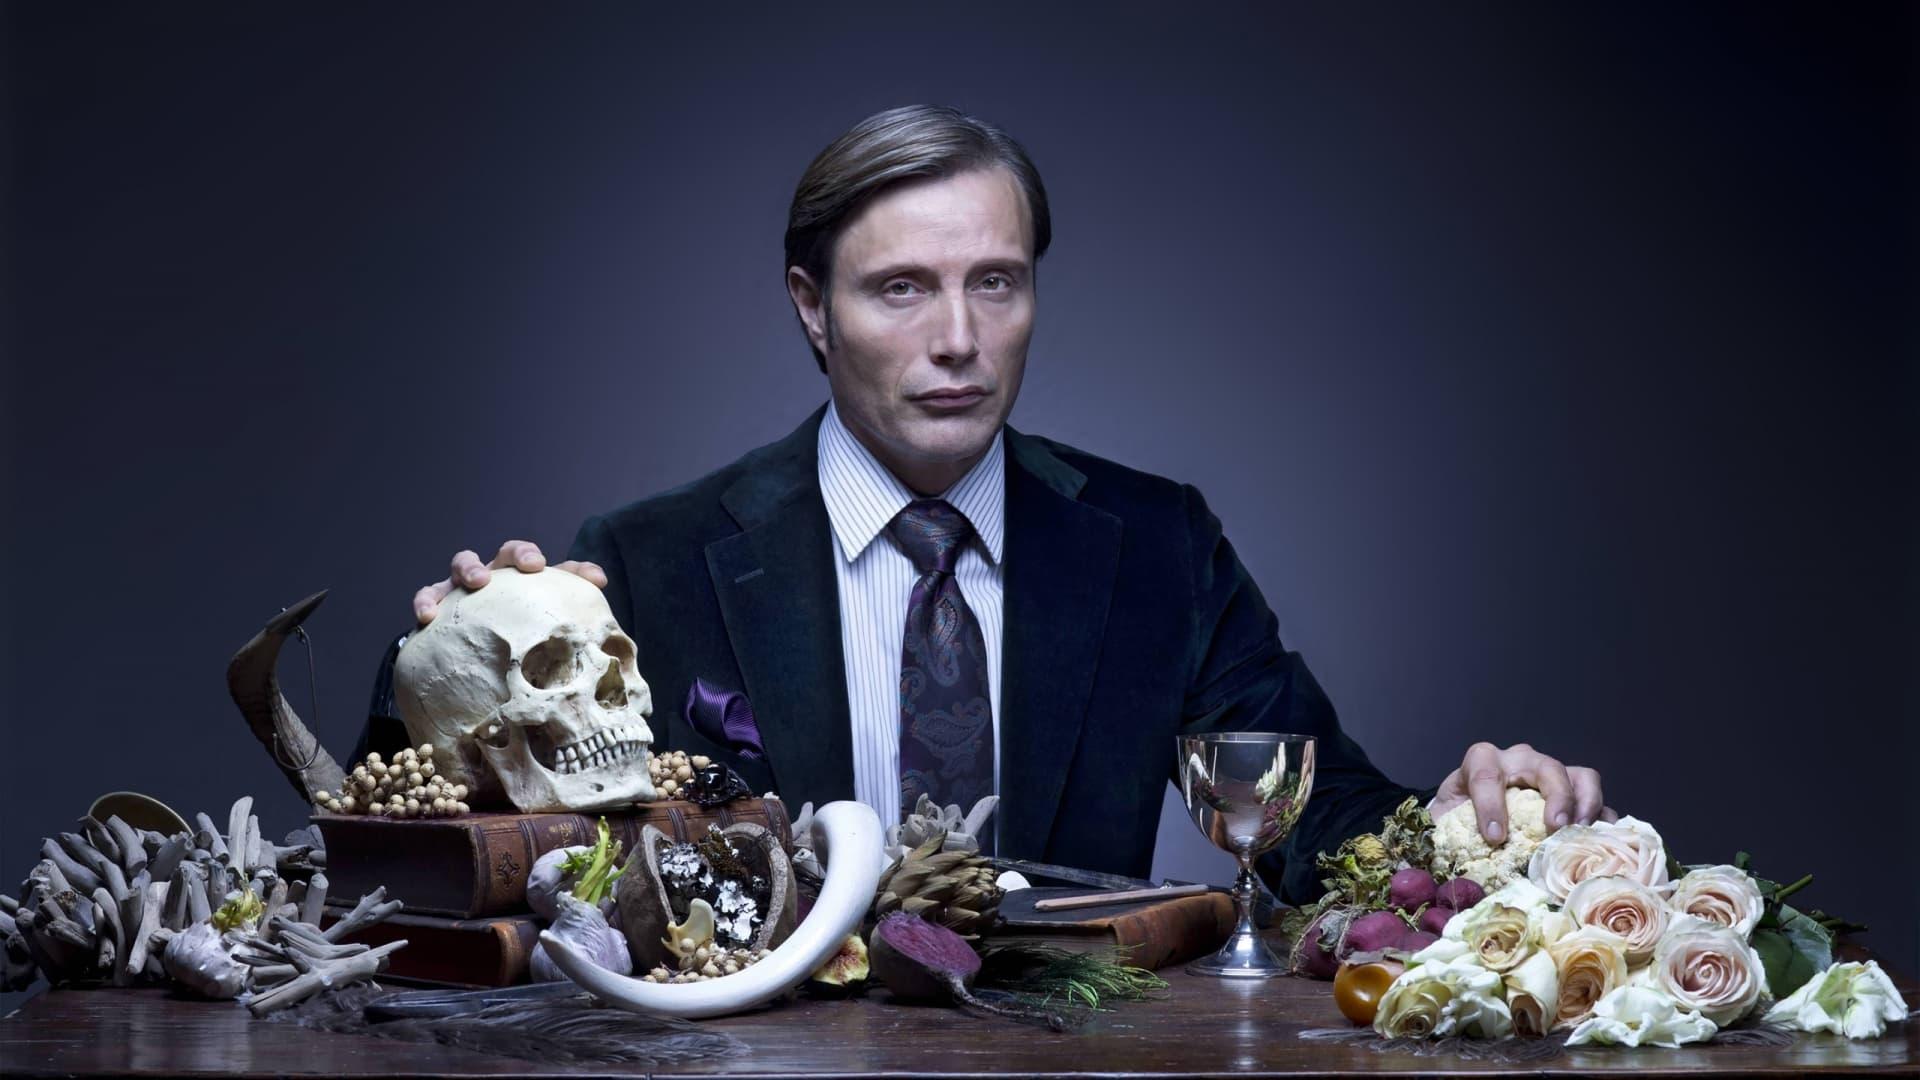 Hannibal: This Is My Design backdrop